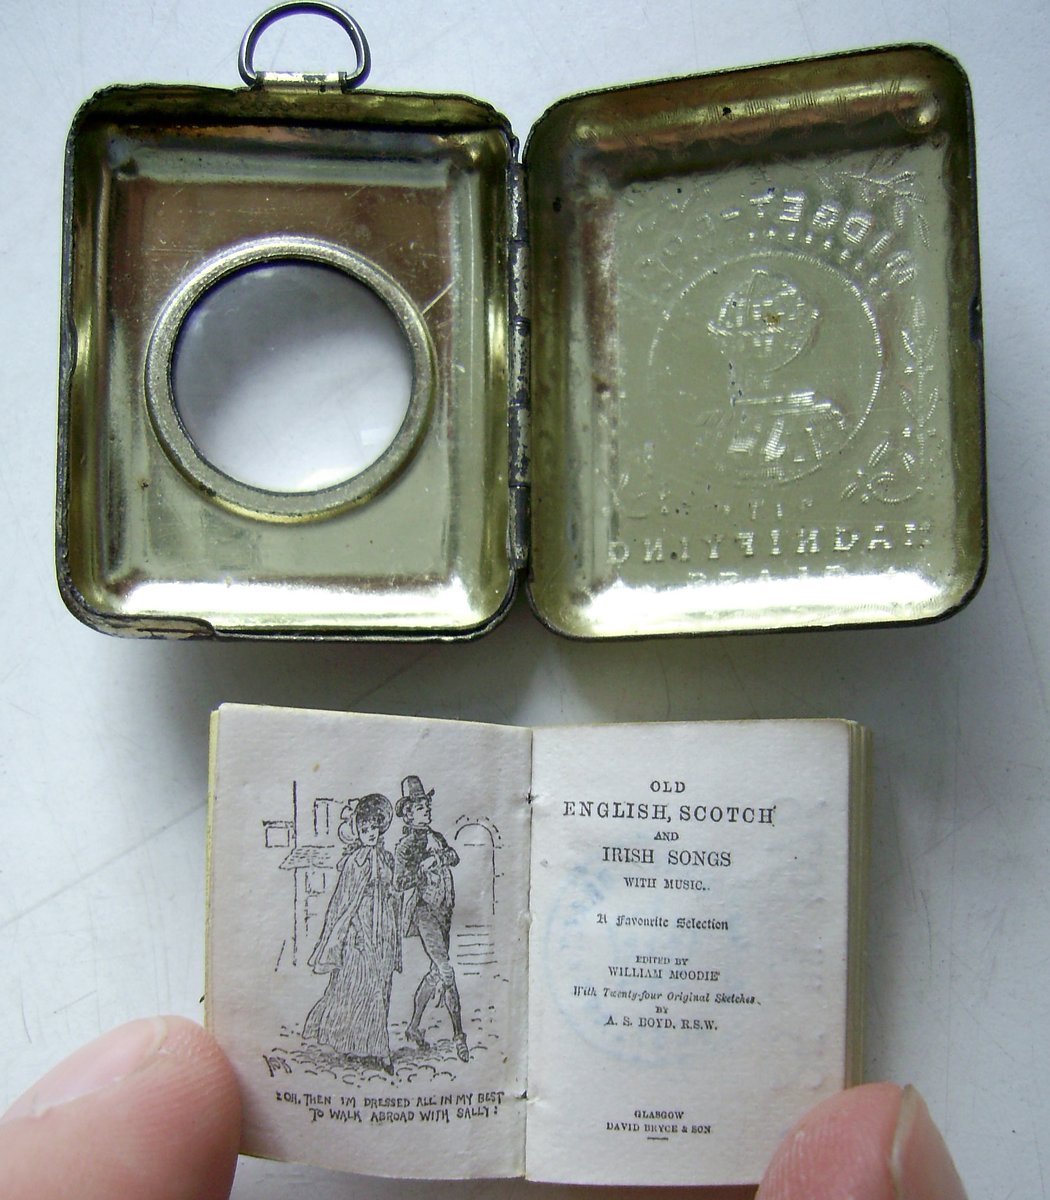 And this rather charming miniature book of songs from 1893 is accompanied by a handy locket with integral magnifying glass >  https://blog.nls.uk/the-smallest-score-in-the-national-library-of-scotland/ #Theseweepages